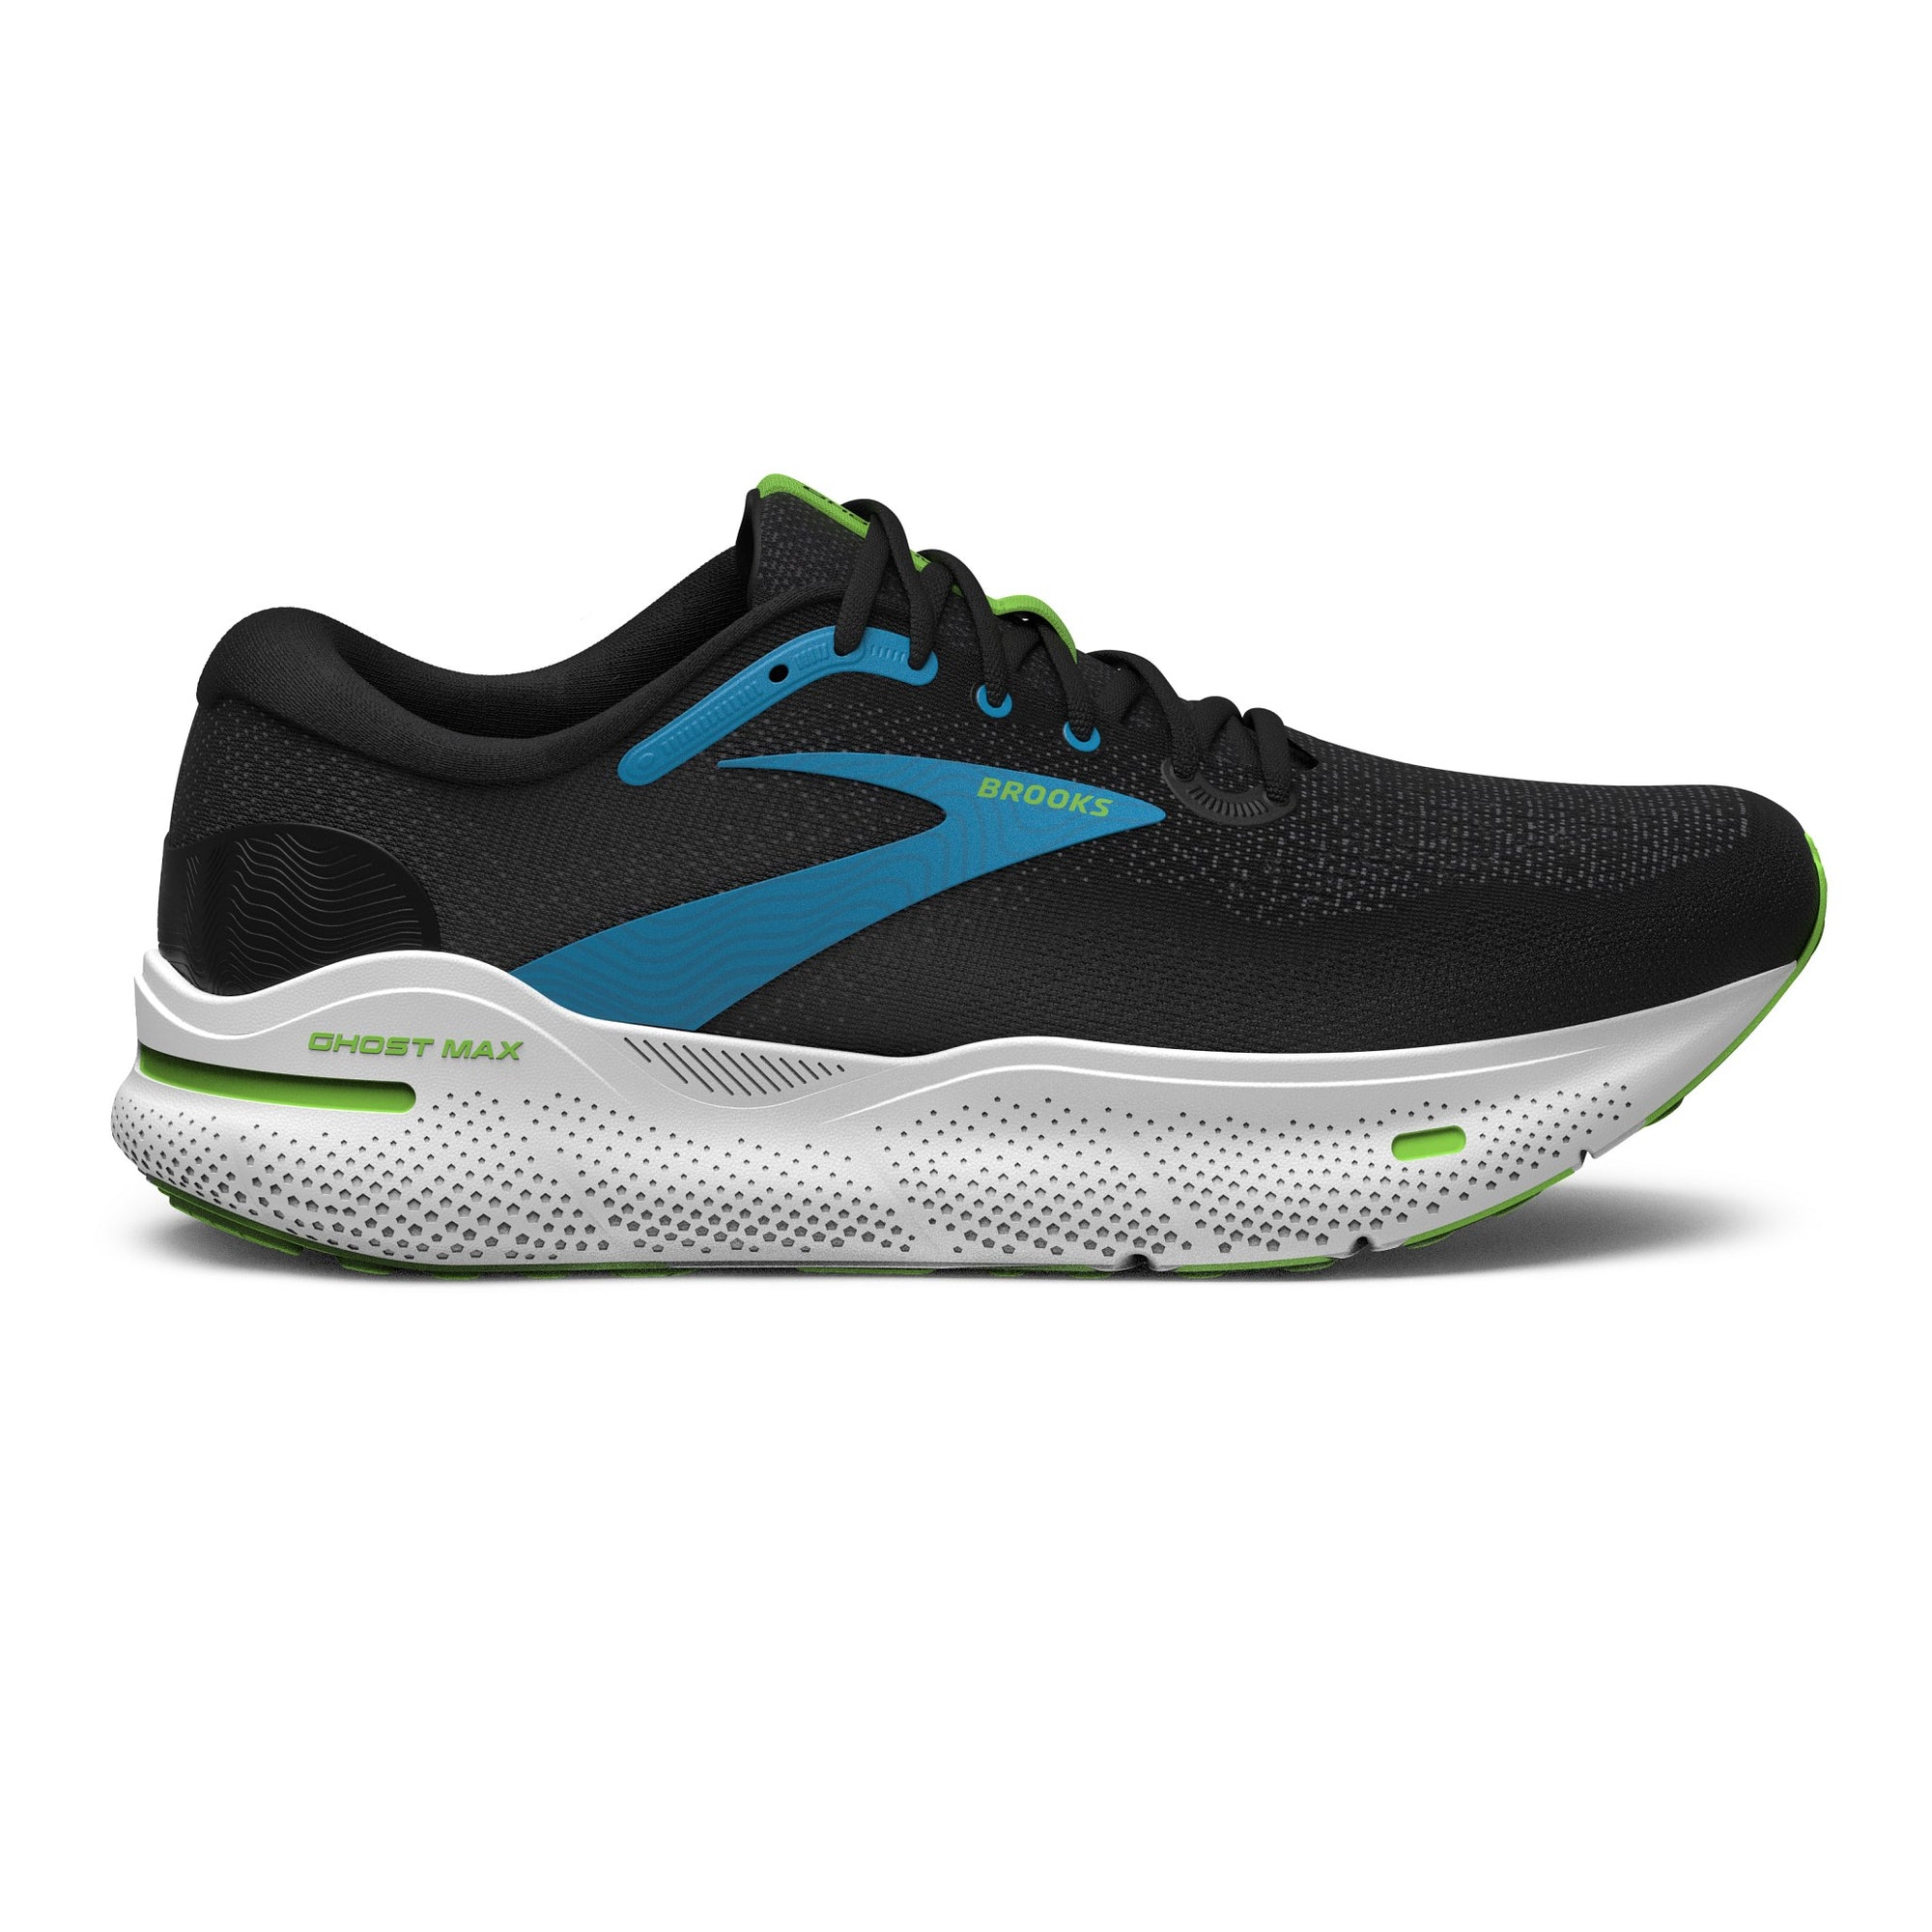 A black and blue Brooks Ghost Max running shoe with white soles and the Brooks logo visible on the side.